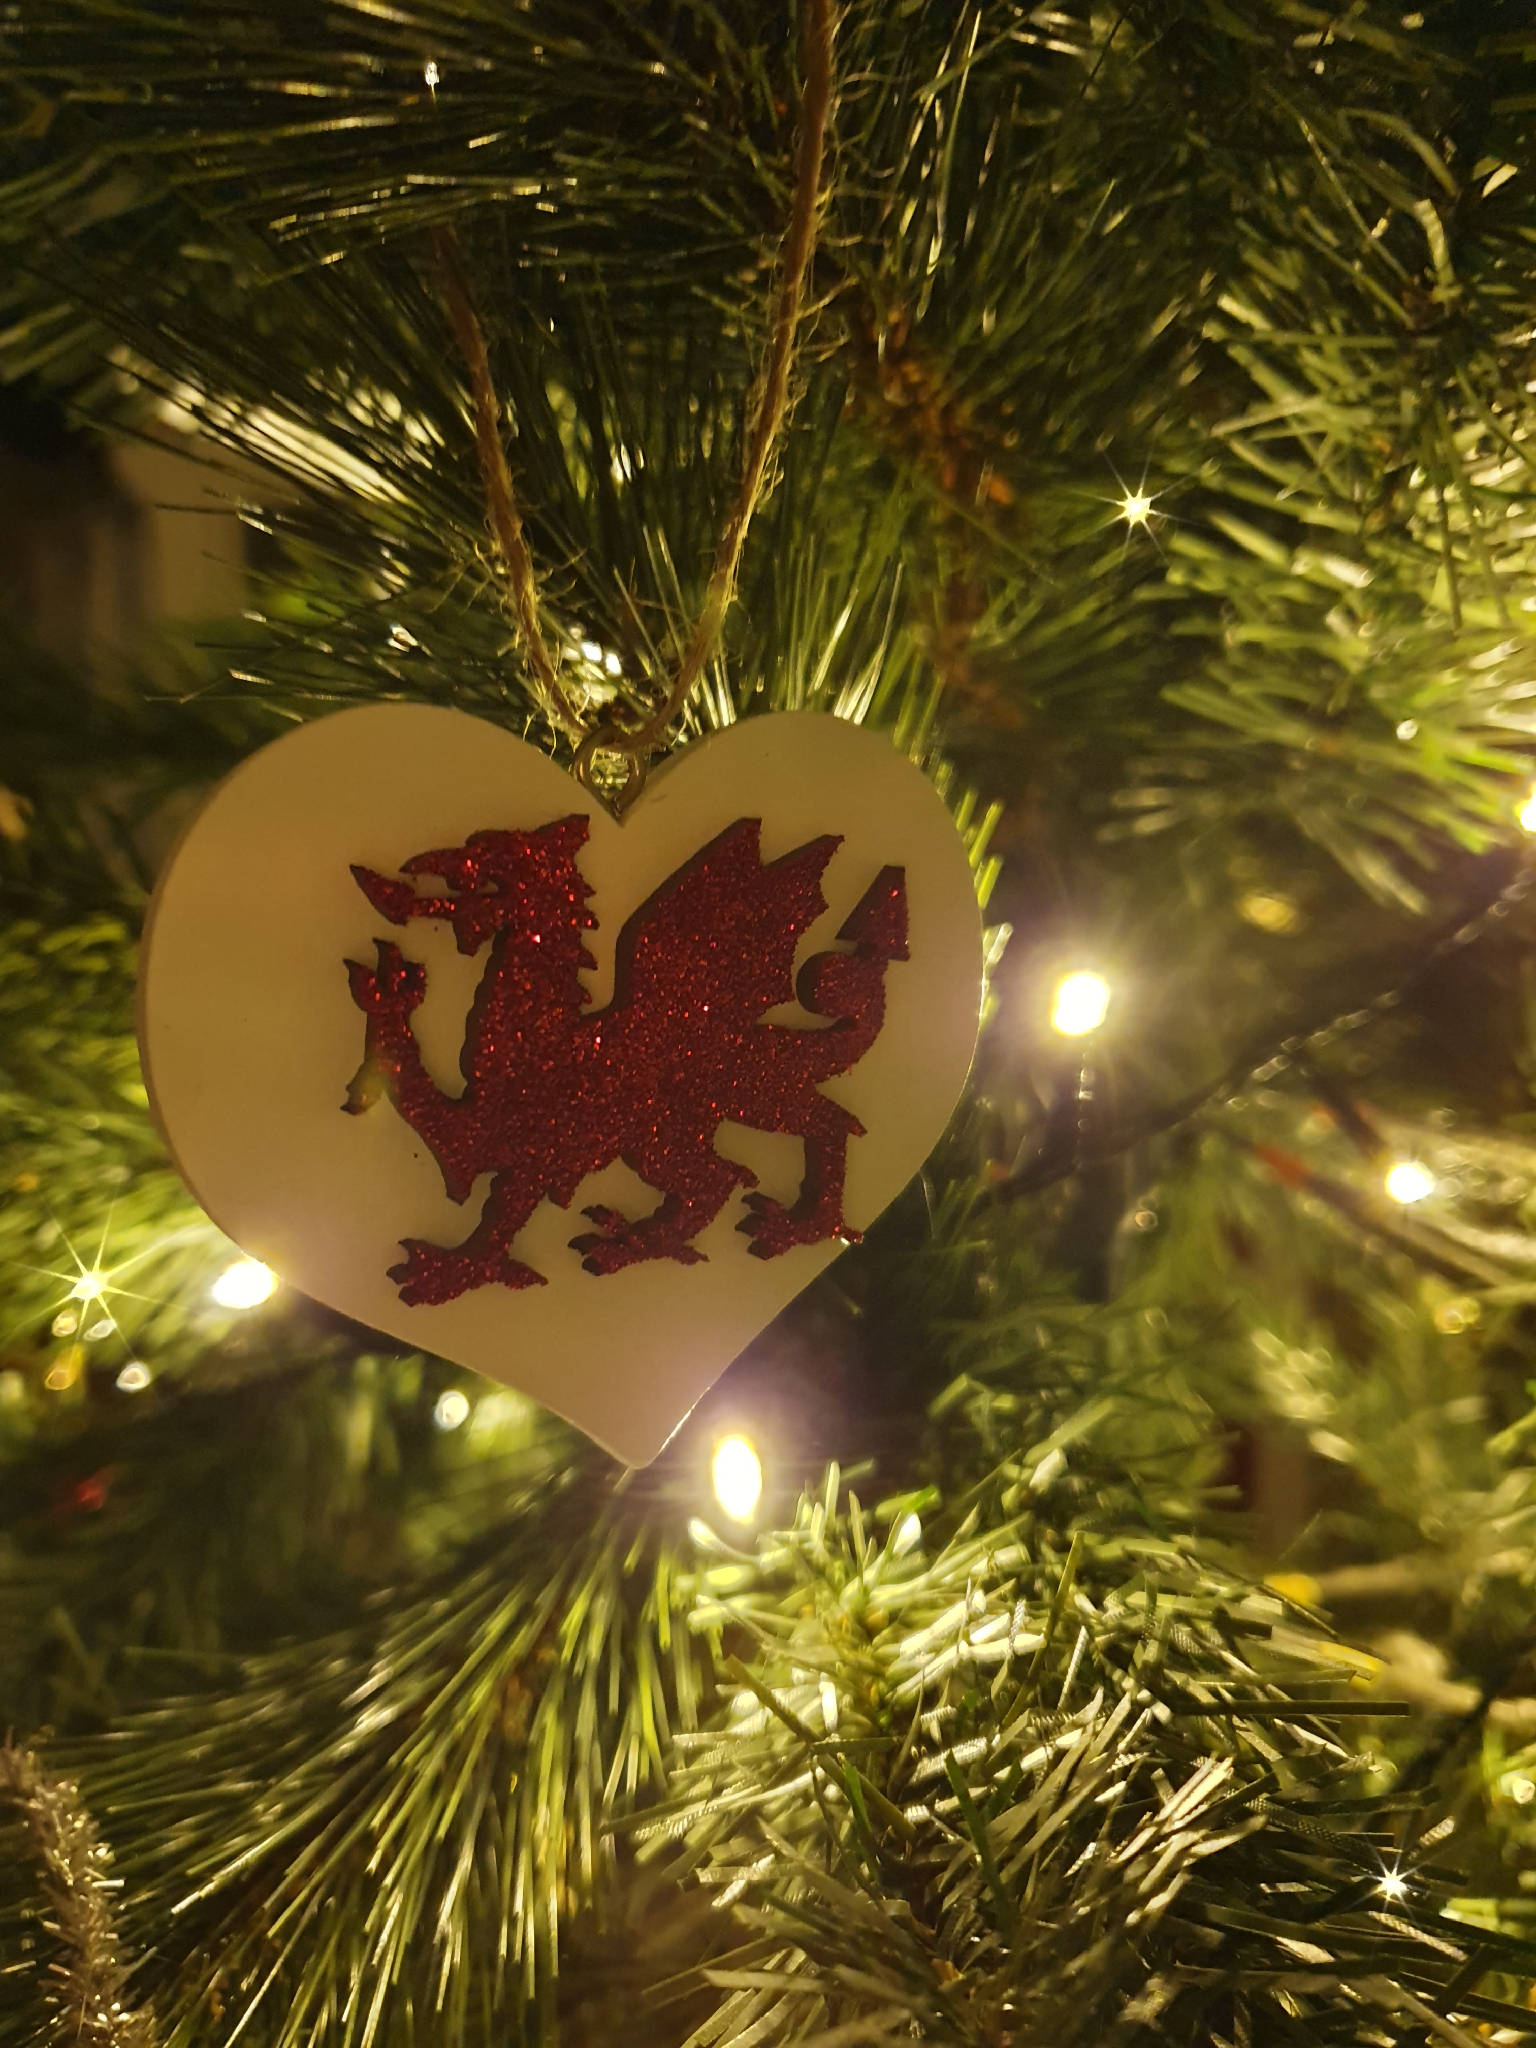 Welsh Red Dragon Themed Christmas/Nadolig Tree Decoration. Handmade to order